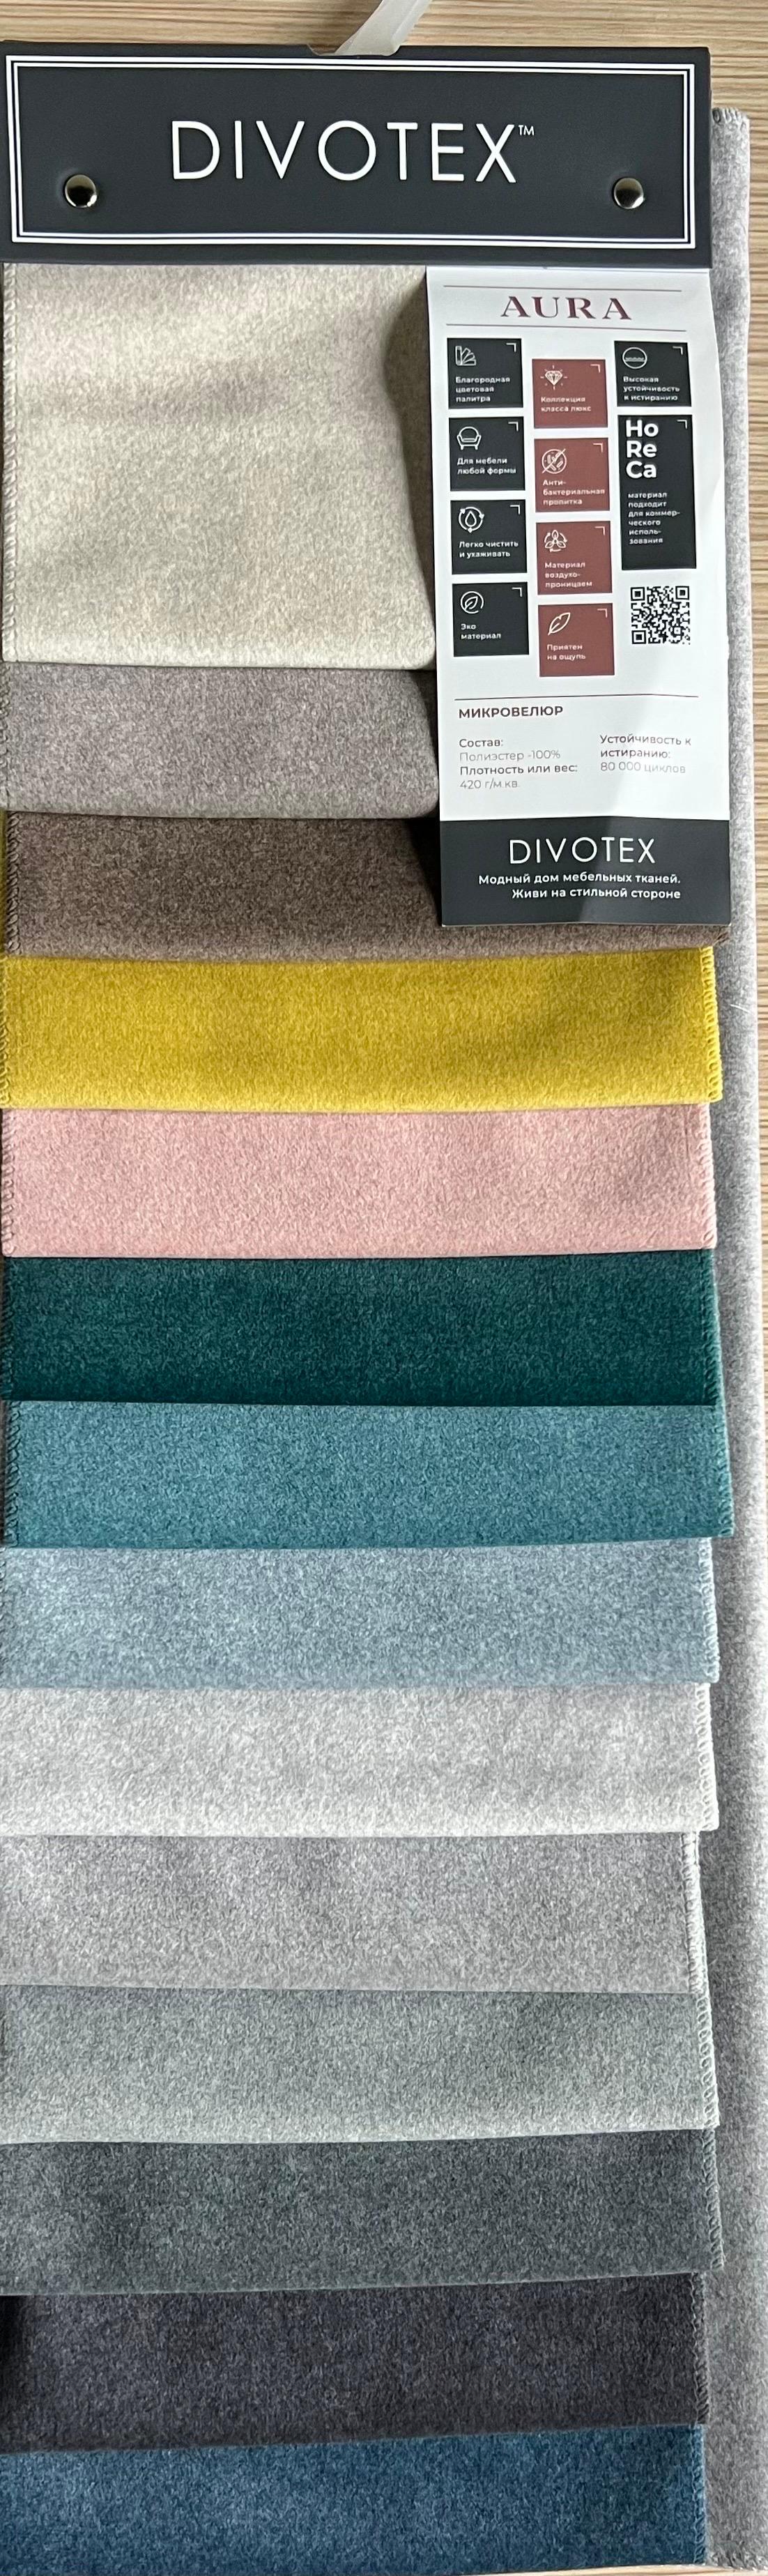 You can order one of the fabric samples to choose a color.
Once the item is ordered, we will deduct the sample fee paid from the order total.